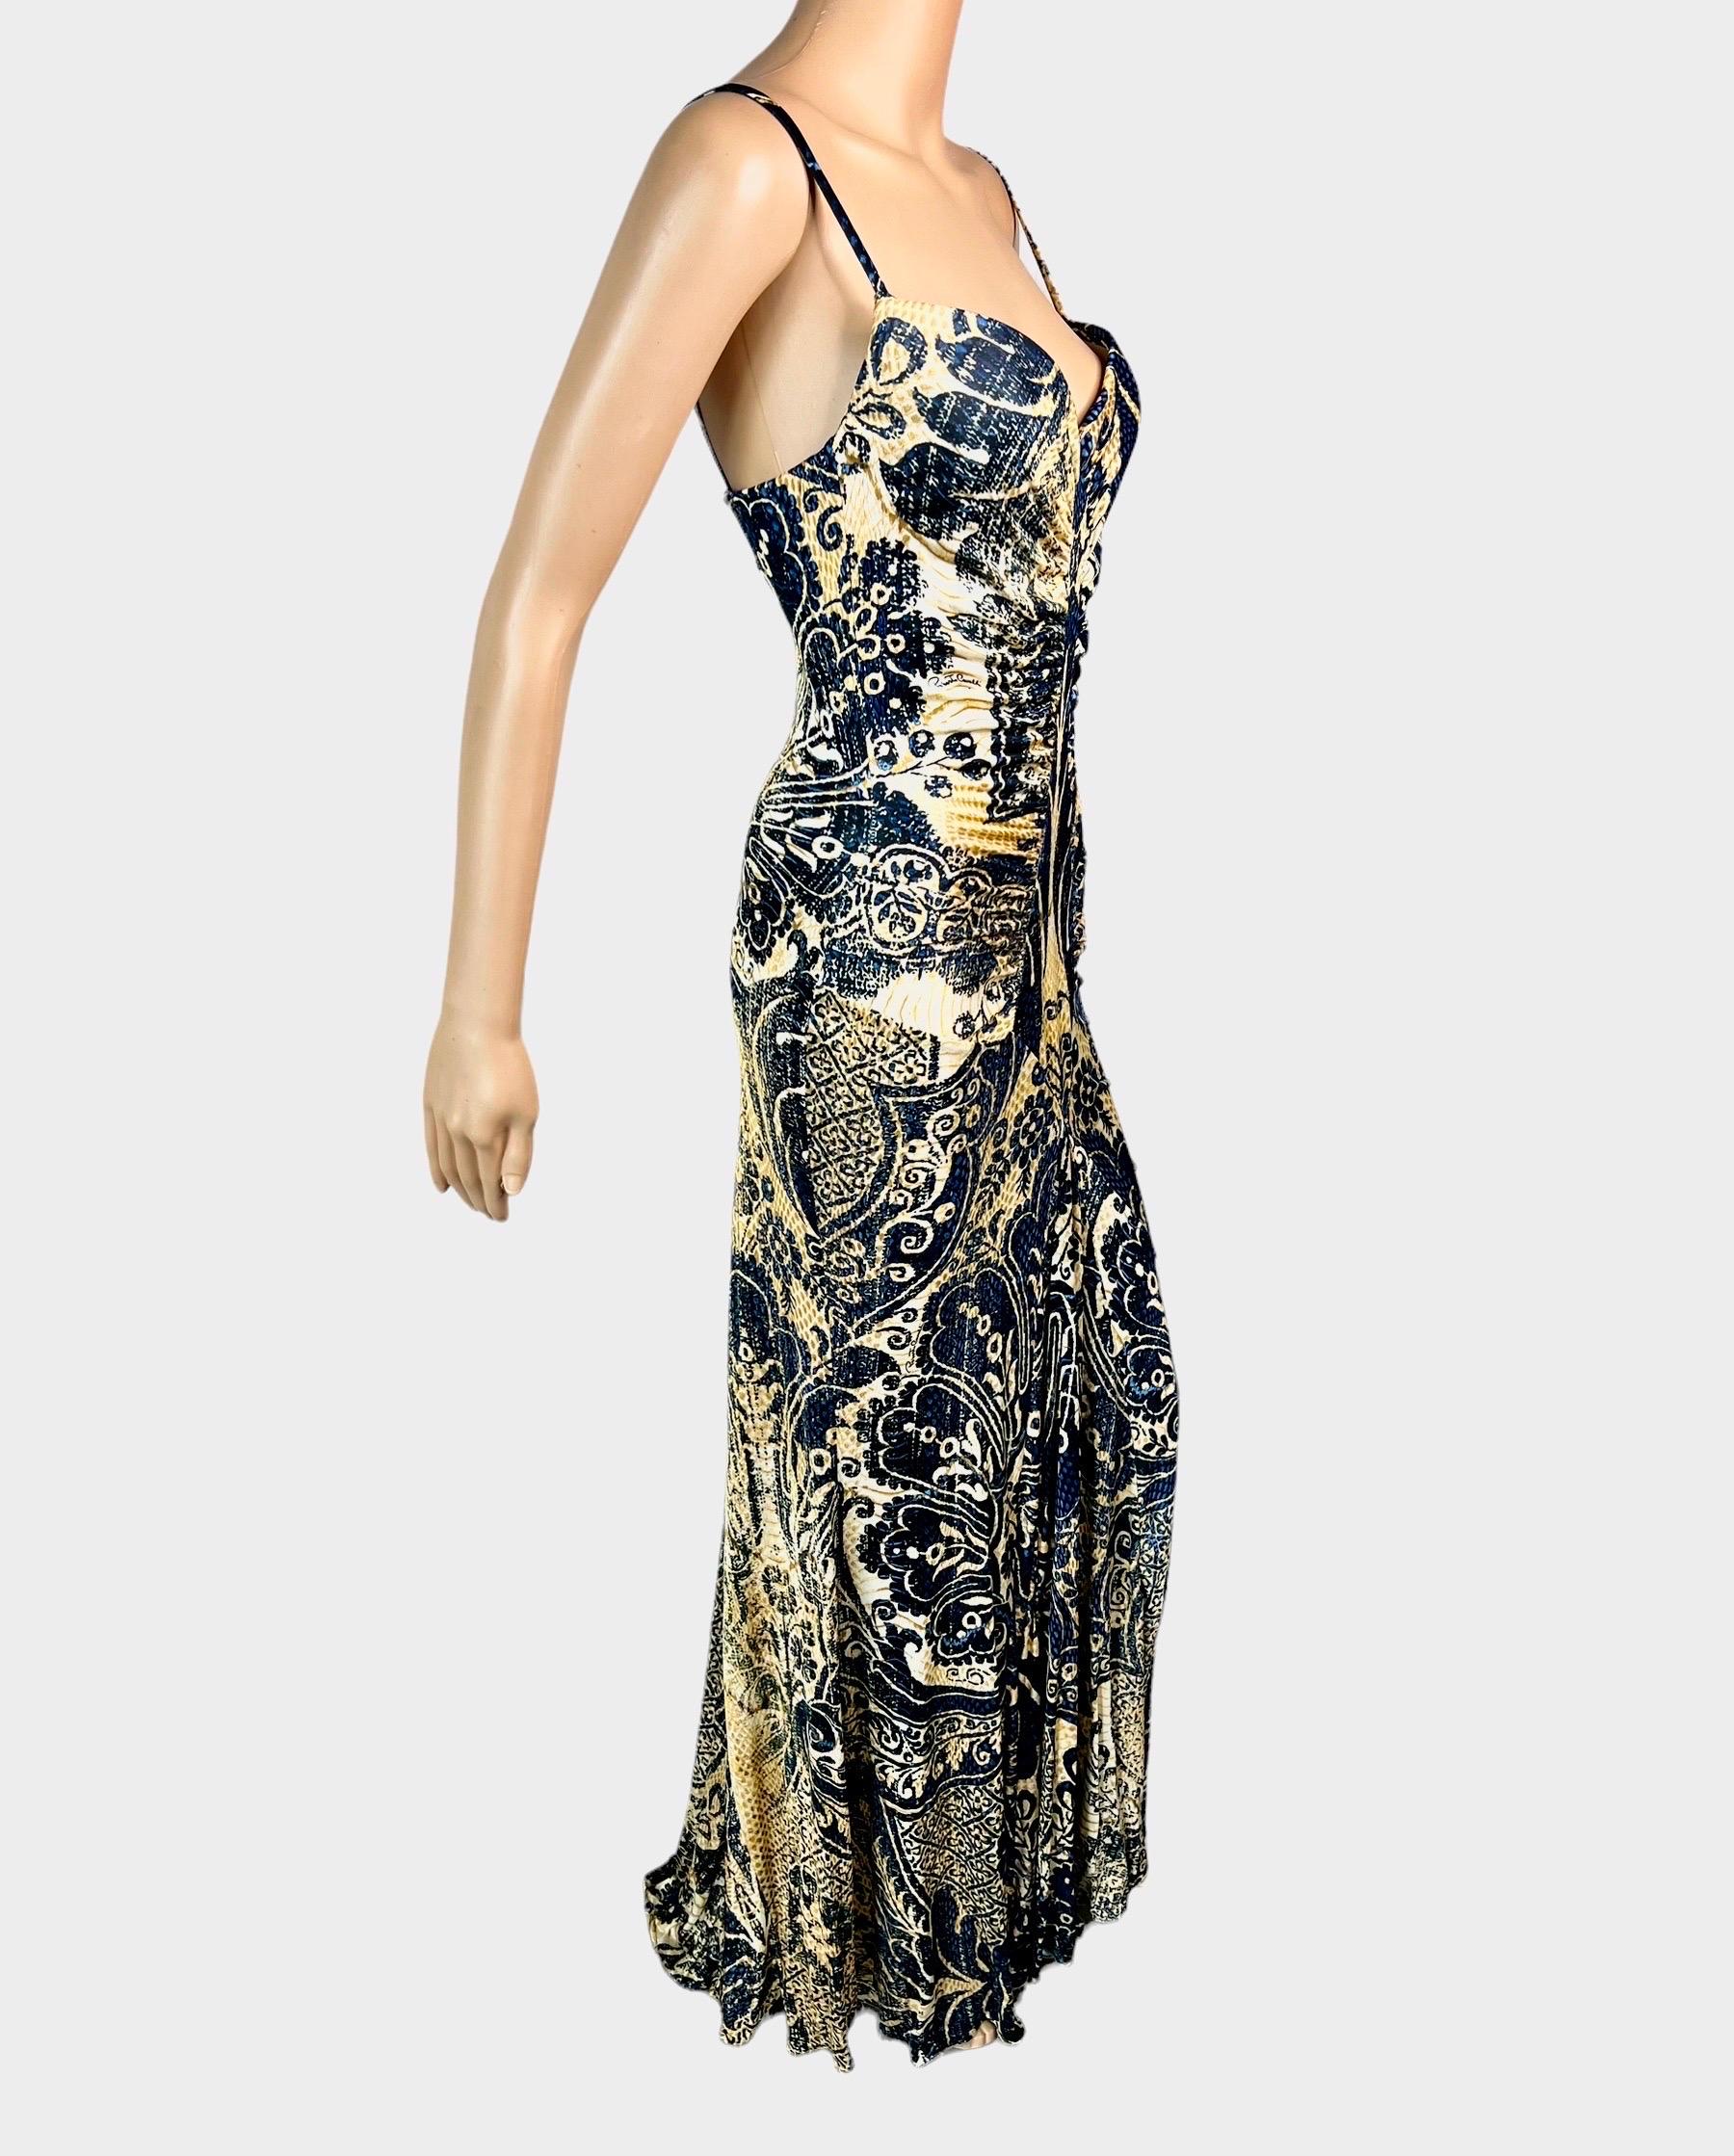 Roberto Cavalli c.2005 Bustier Bra Abstract Print Maxi Evening Dress Gown For Sale 1